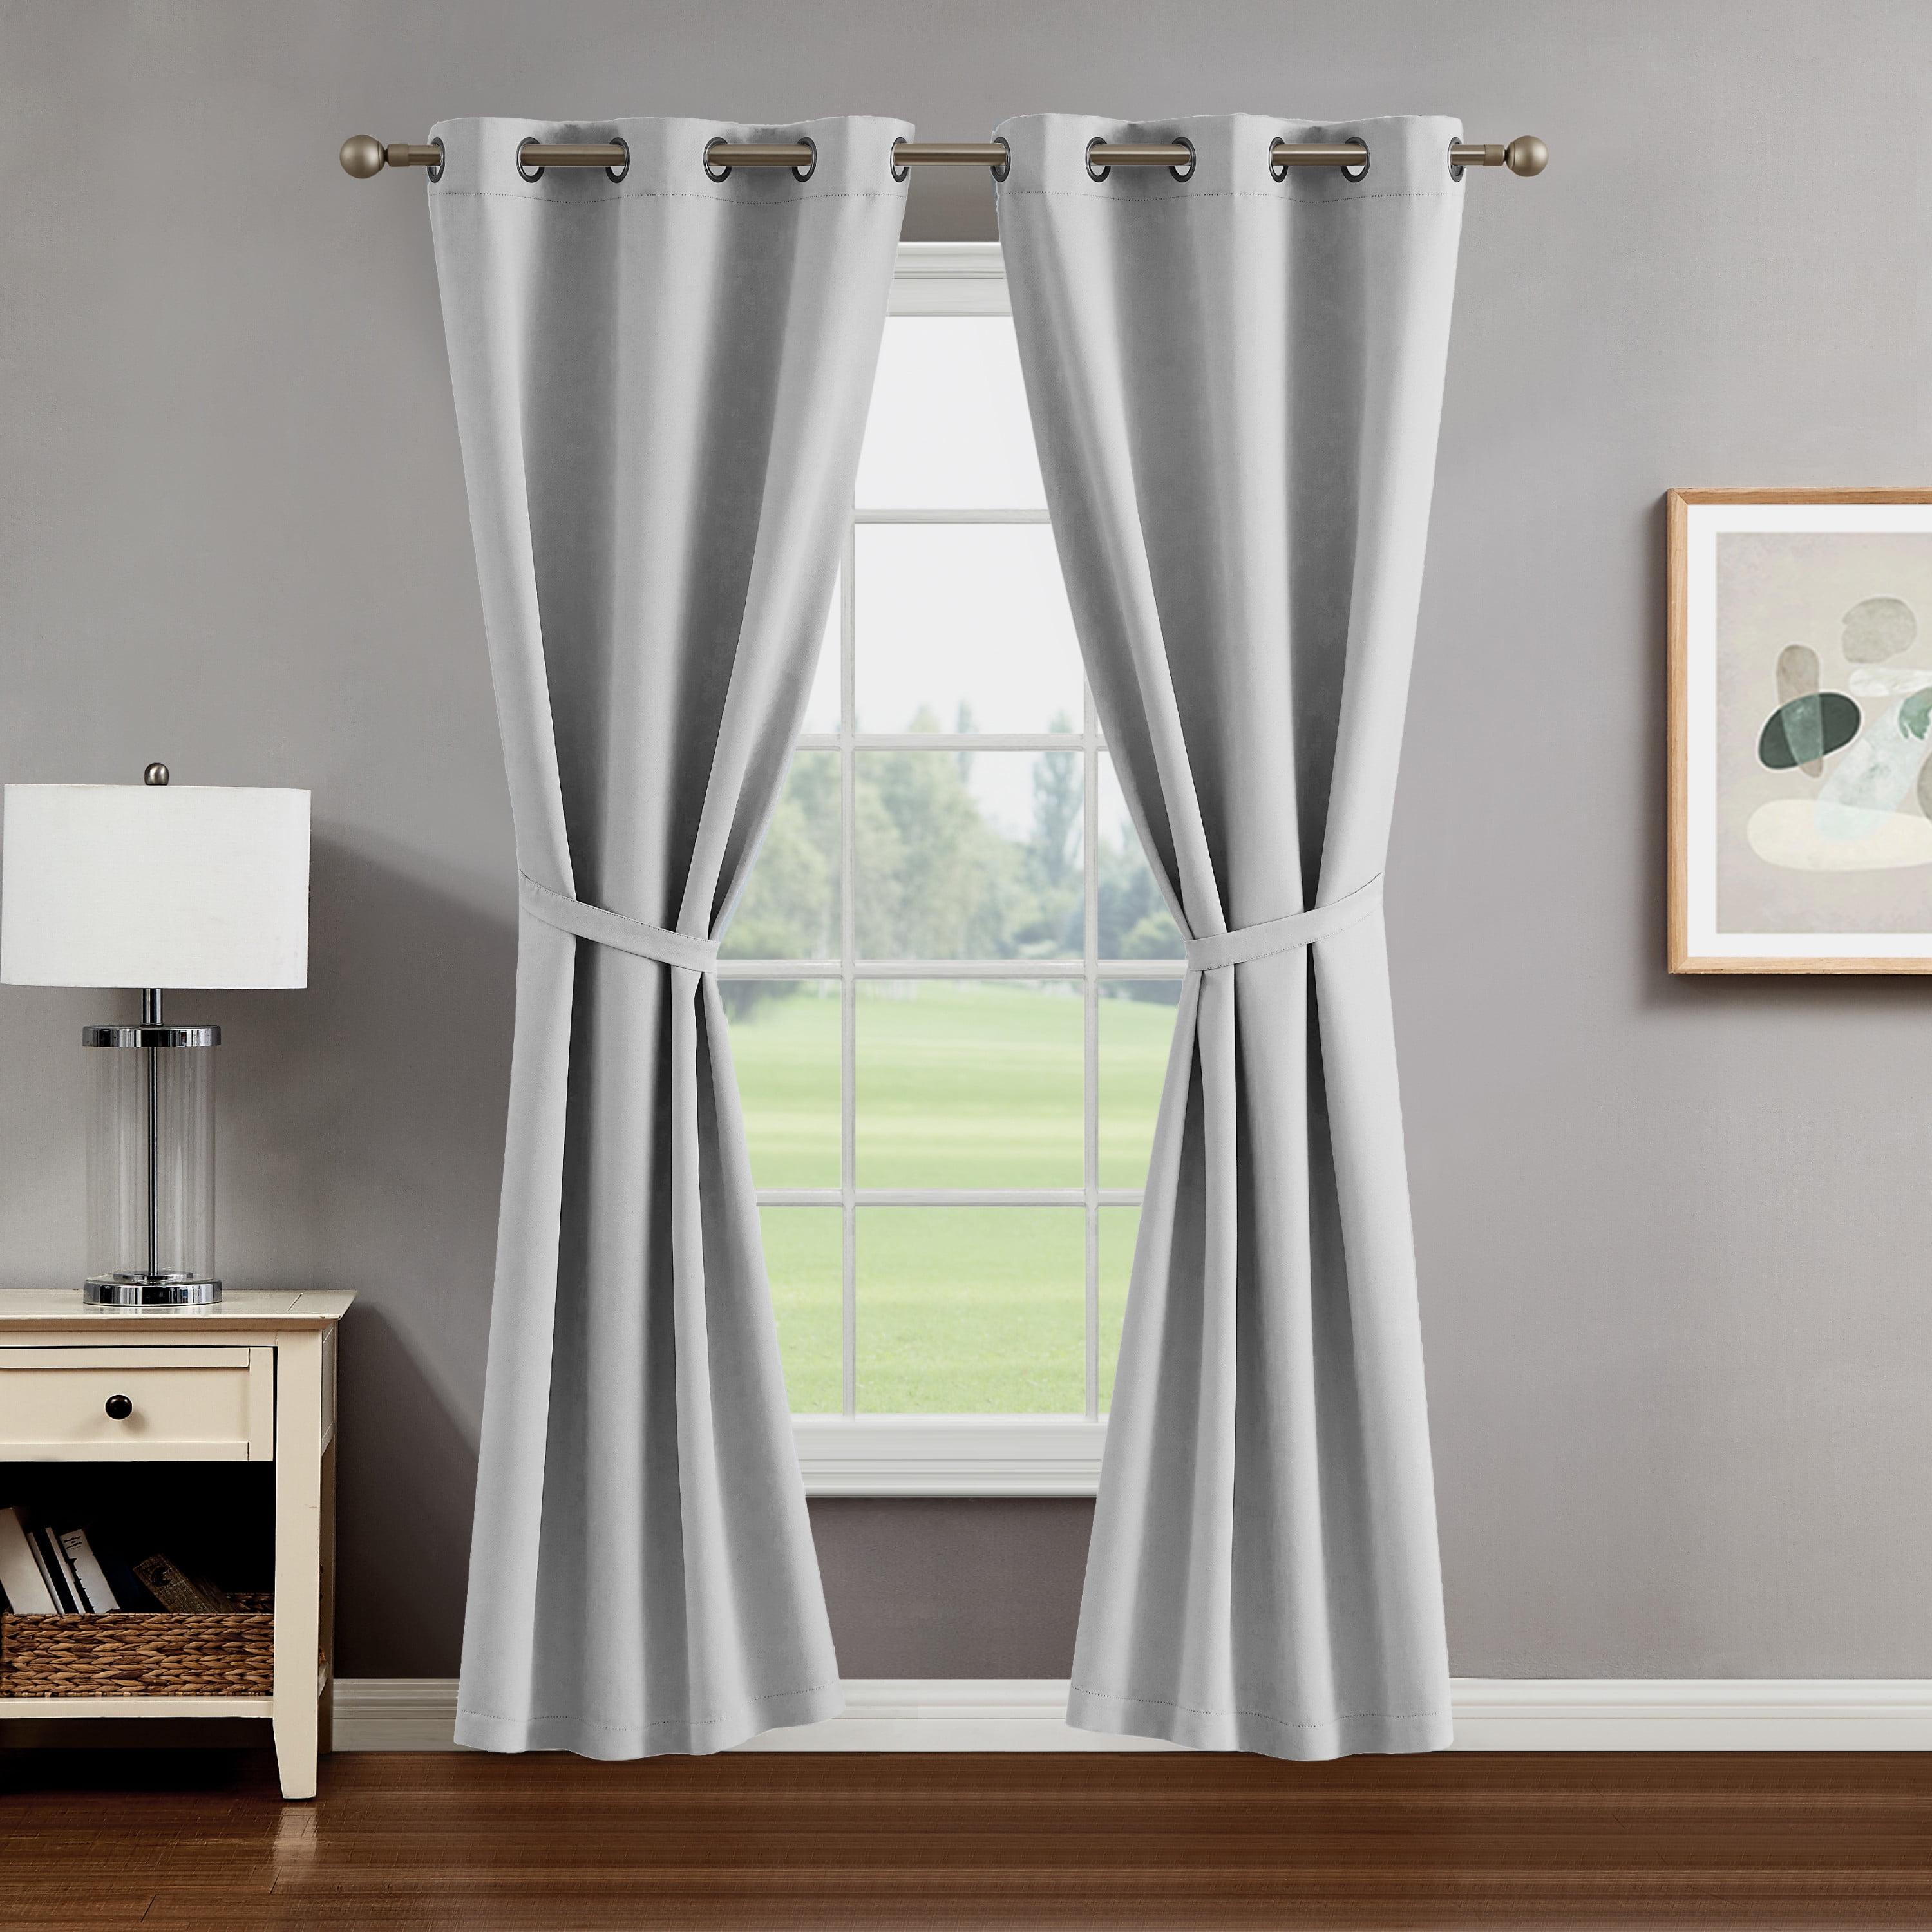 Mid Grey Blackout Curtains Eyelet Ring Top Super Soft Touch with 2 Tiebacks 